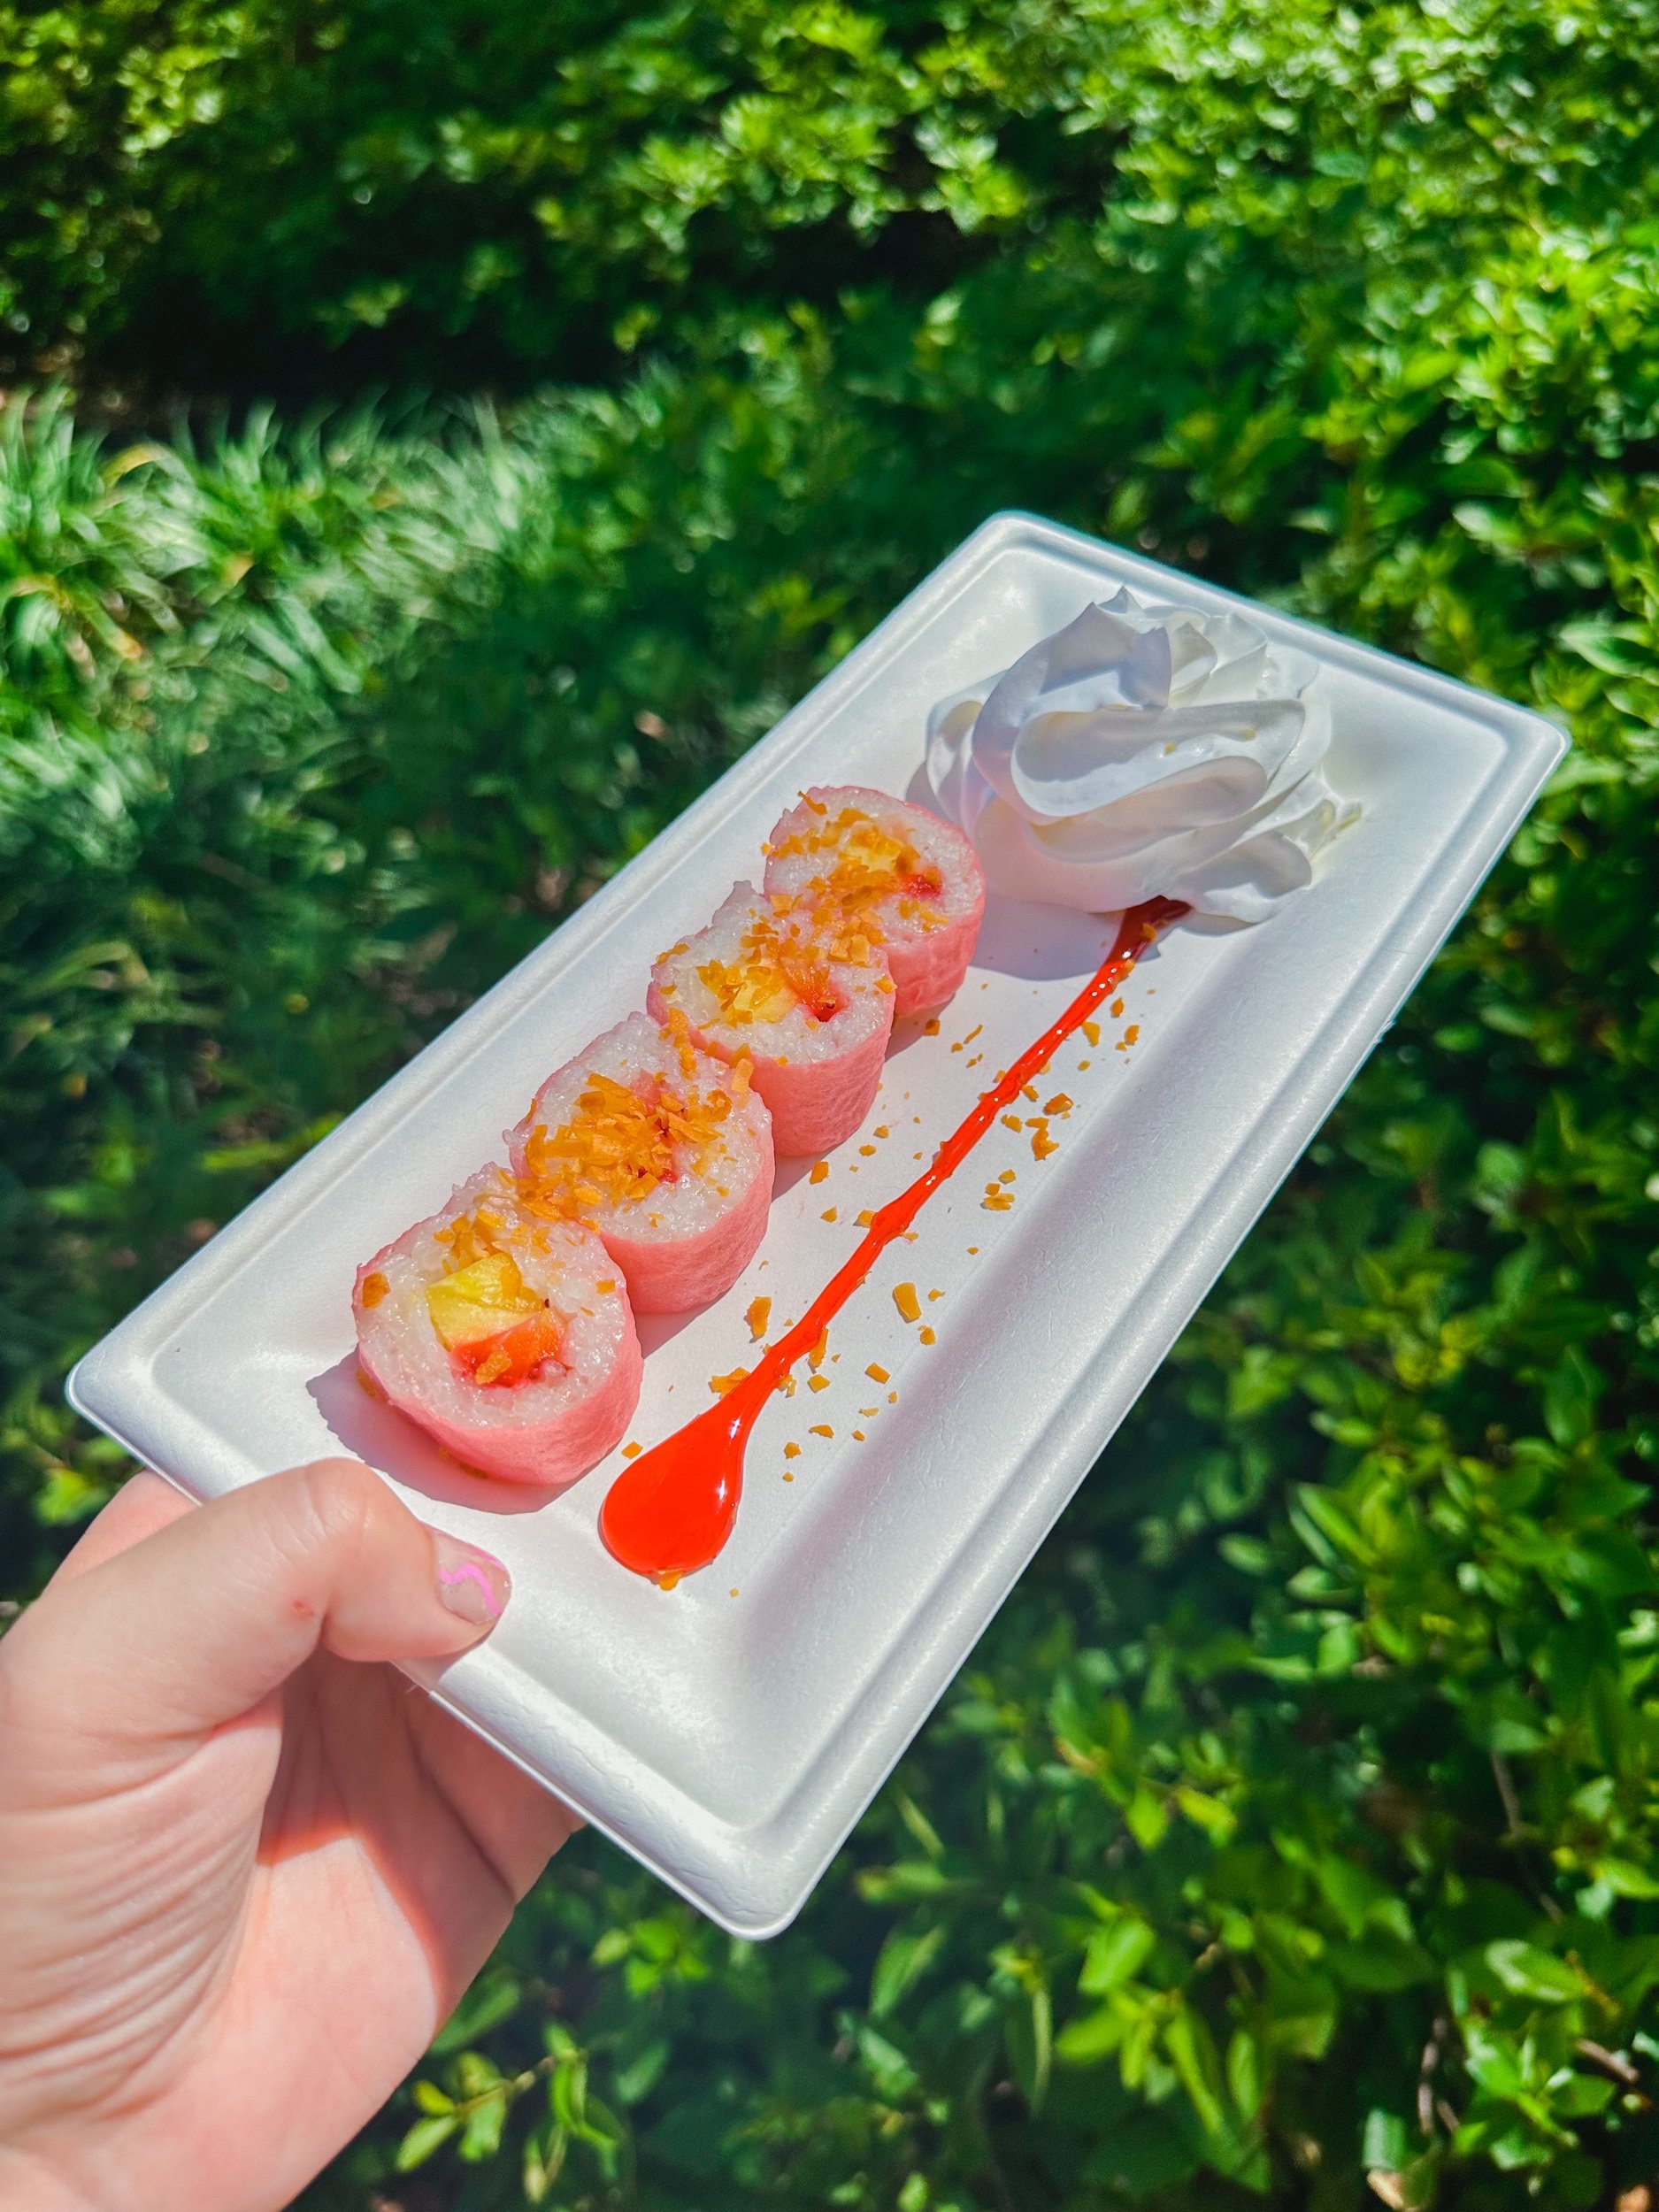 Frushi: Strawberry, pineapple, and lychee wrapped in coconut rice and pink soy wrap served with whipped cream, drizzled raspberry sauce, and toasted coconut